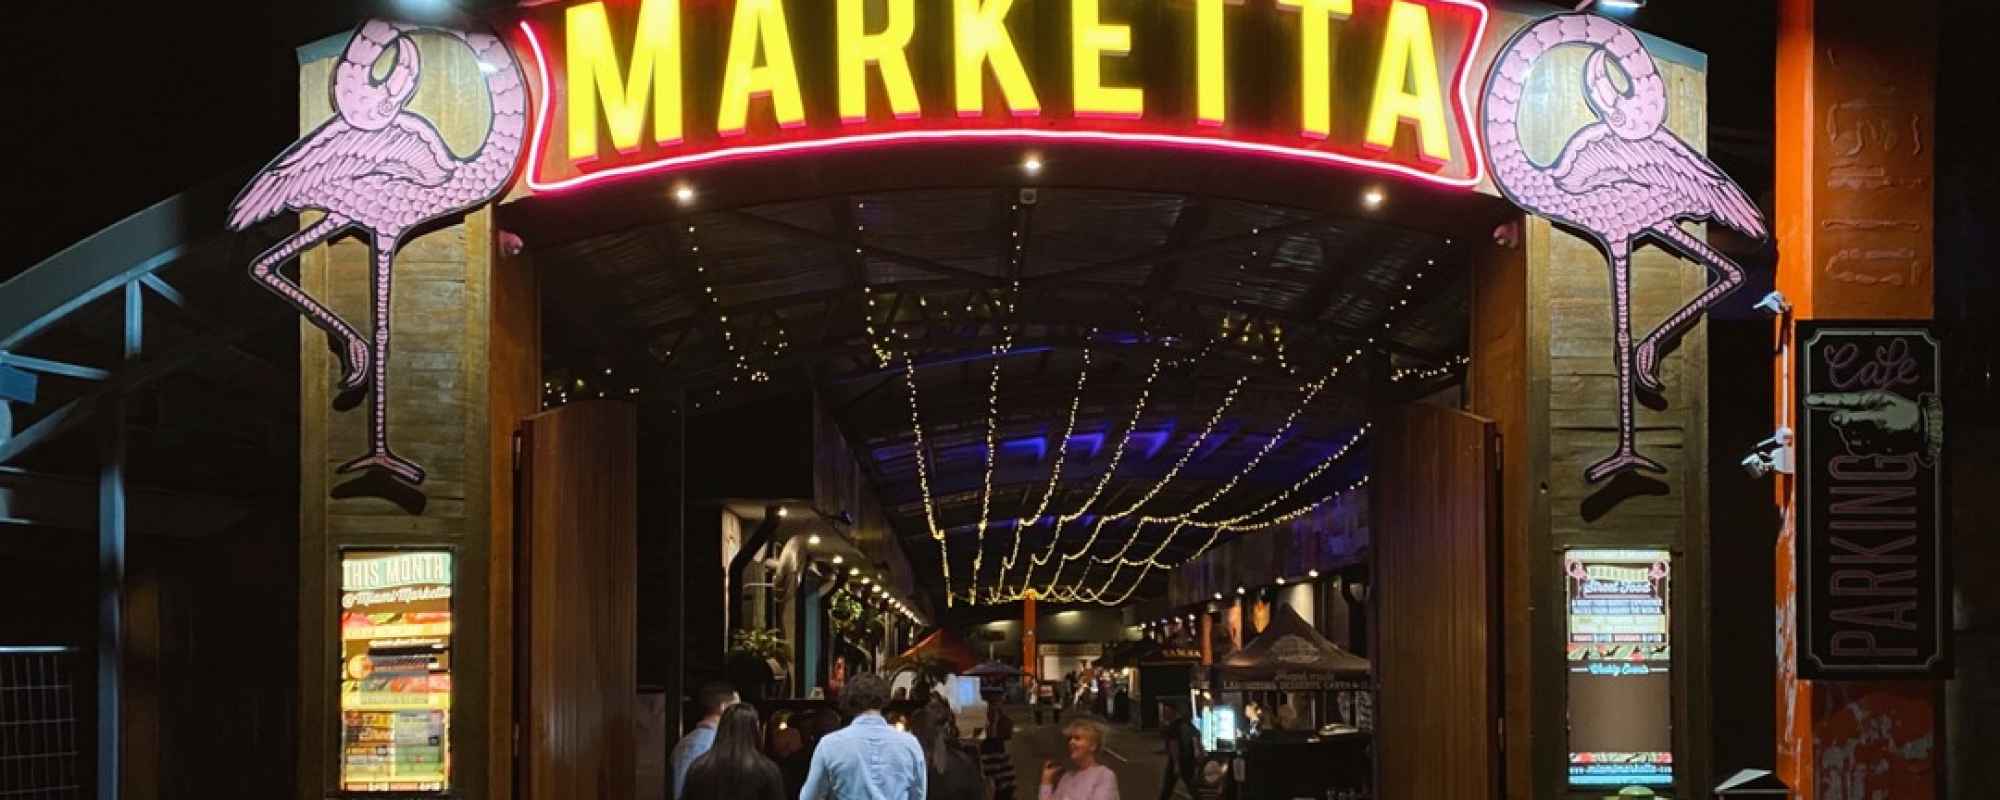 Miami Marketta Street Food is located 3km from Nobby Beach Holiday Village